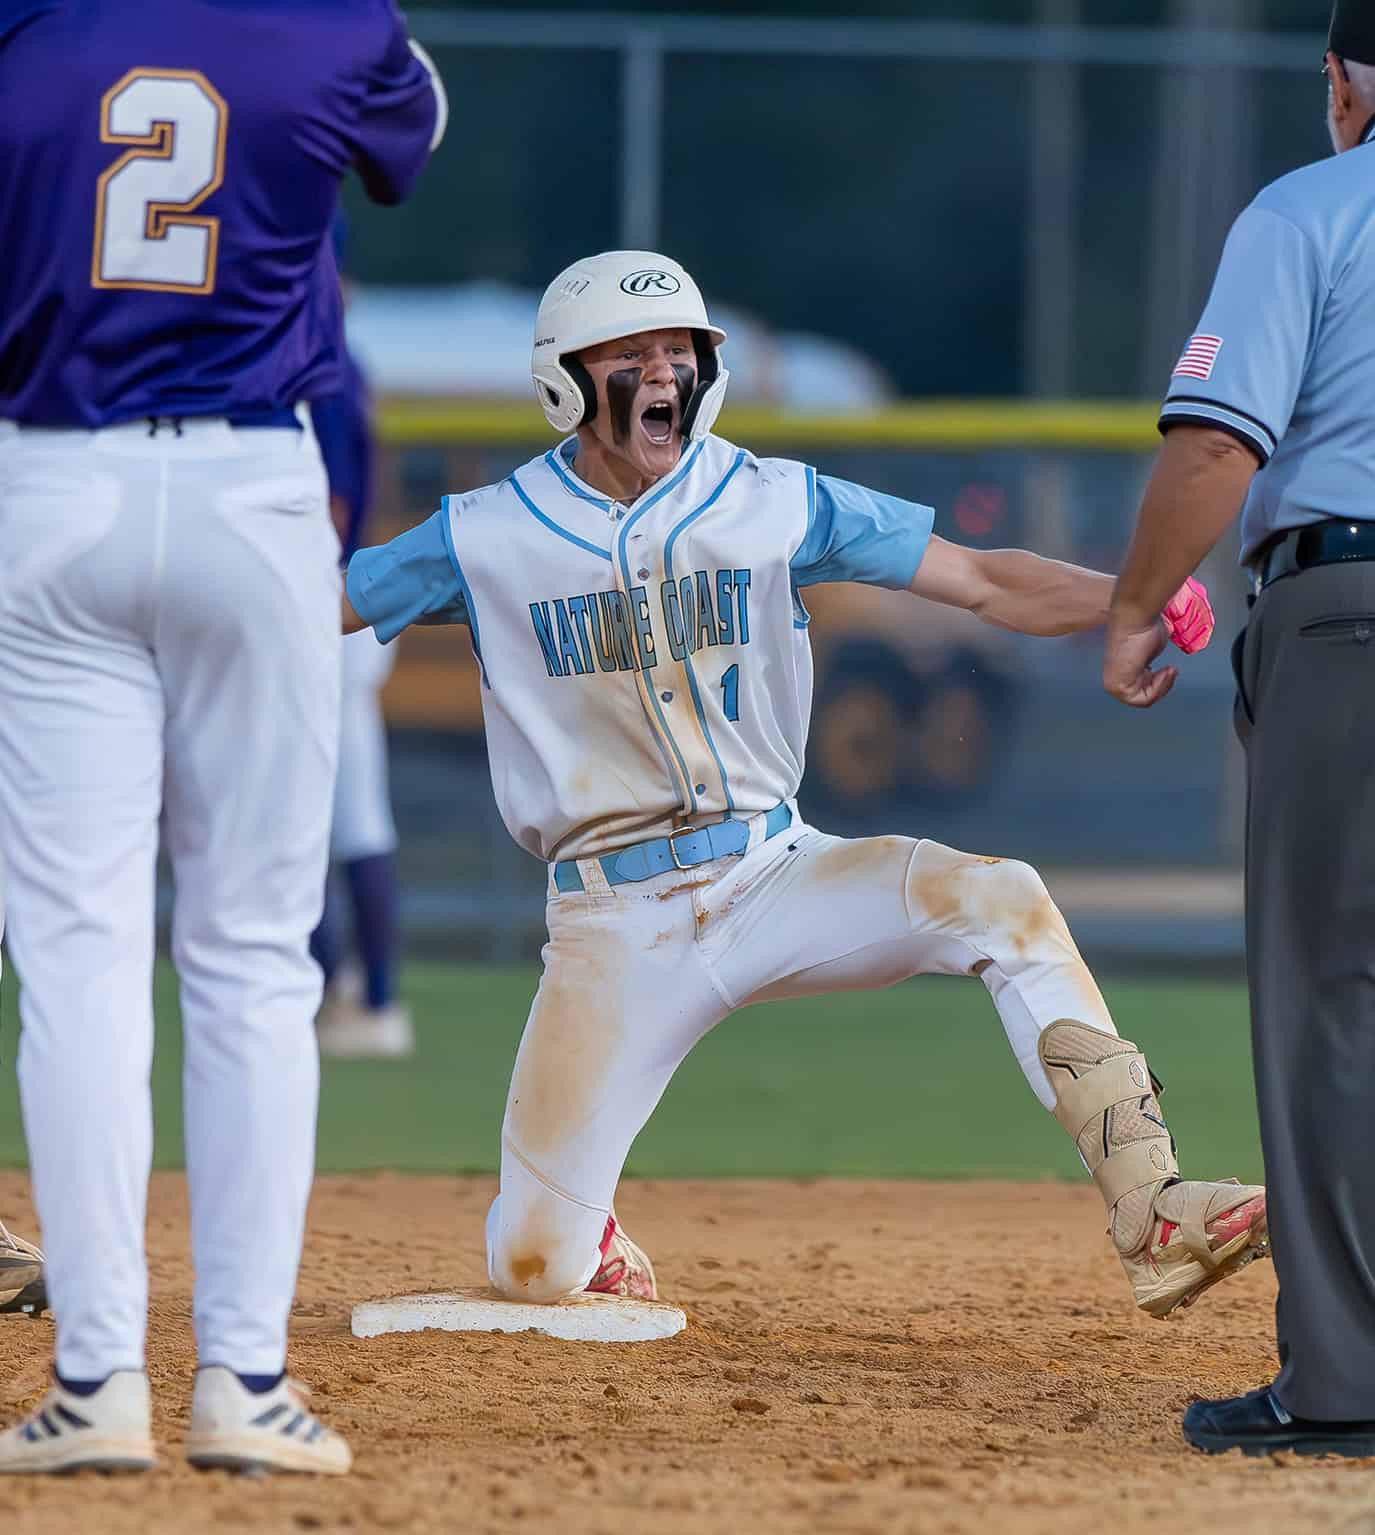 Nature Coast Tech’s, 1, Cody Wright reacts after hitting a double as the Sharks attempted to come back versus Hernando High in the FHSAA 4A Regional semifinal game. Photo by [Joseph Dicristofalo]